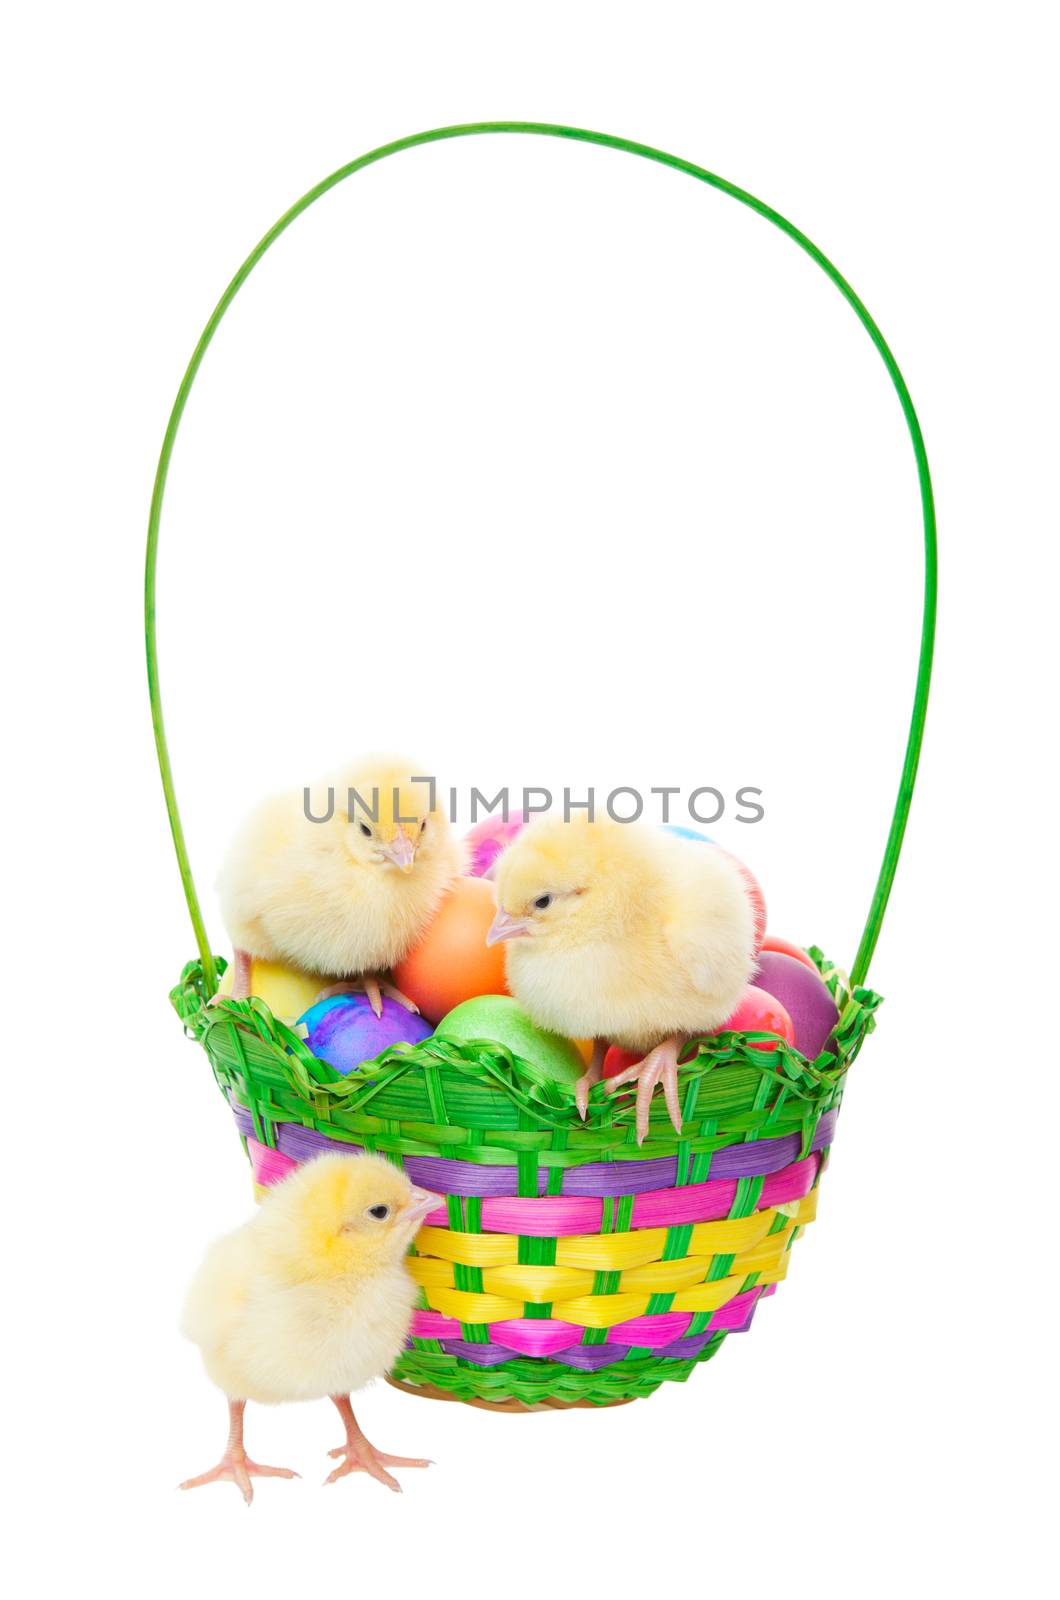 Newly hatched chicks in an Easter basket filled with dyed eggs.  Shot on white background.